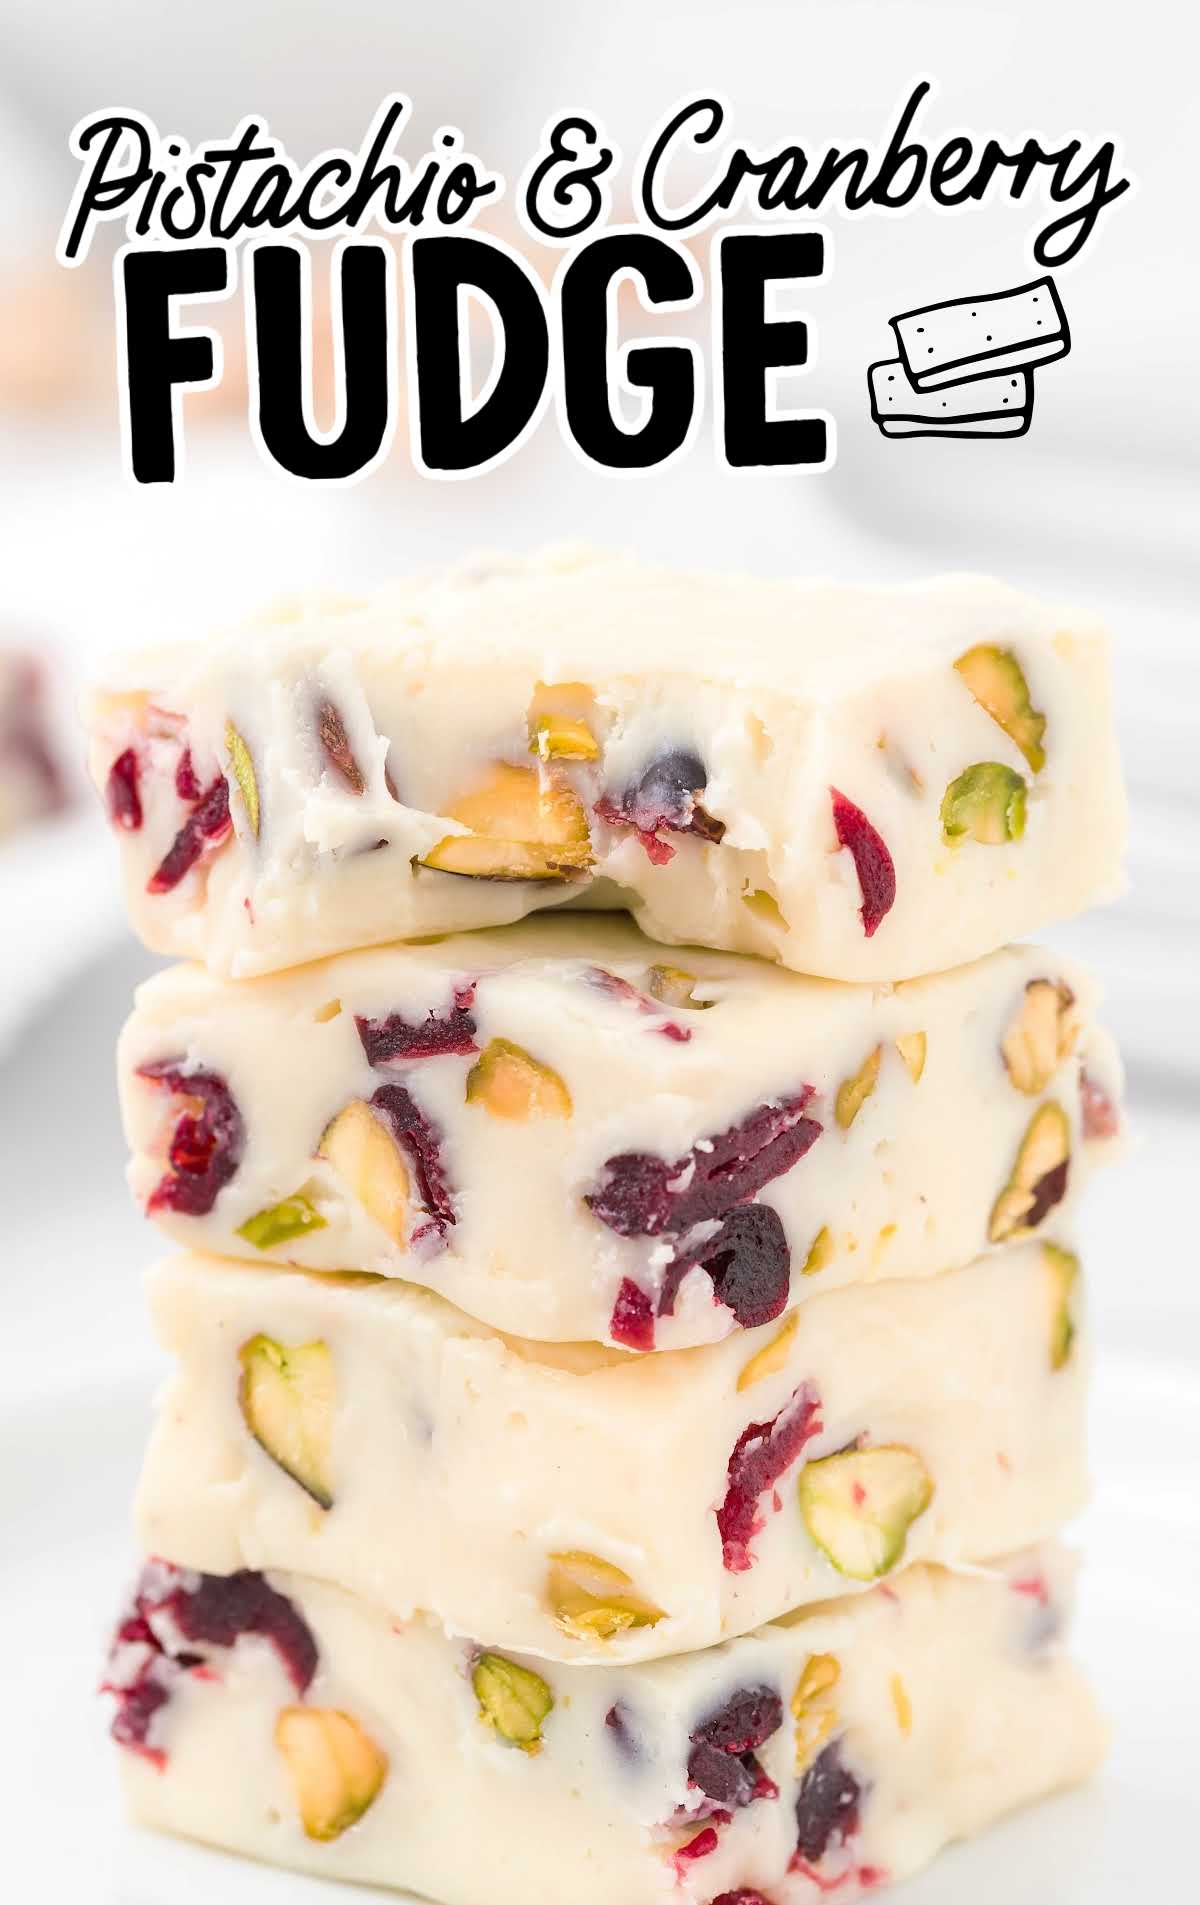 Pistachio and Cranberry Fudge stacked on top of each other